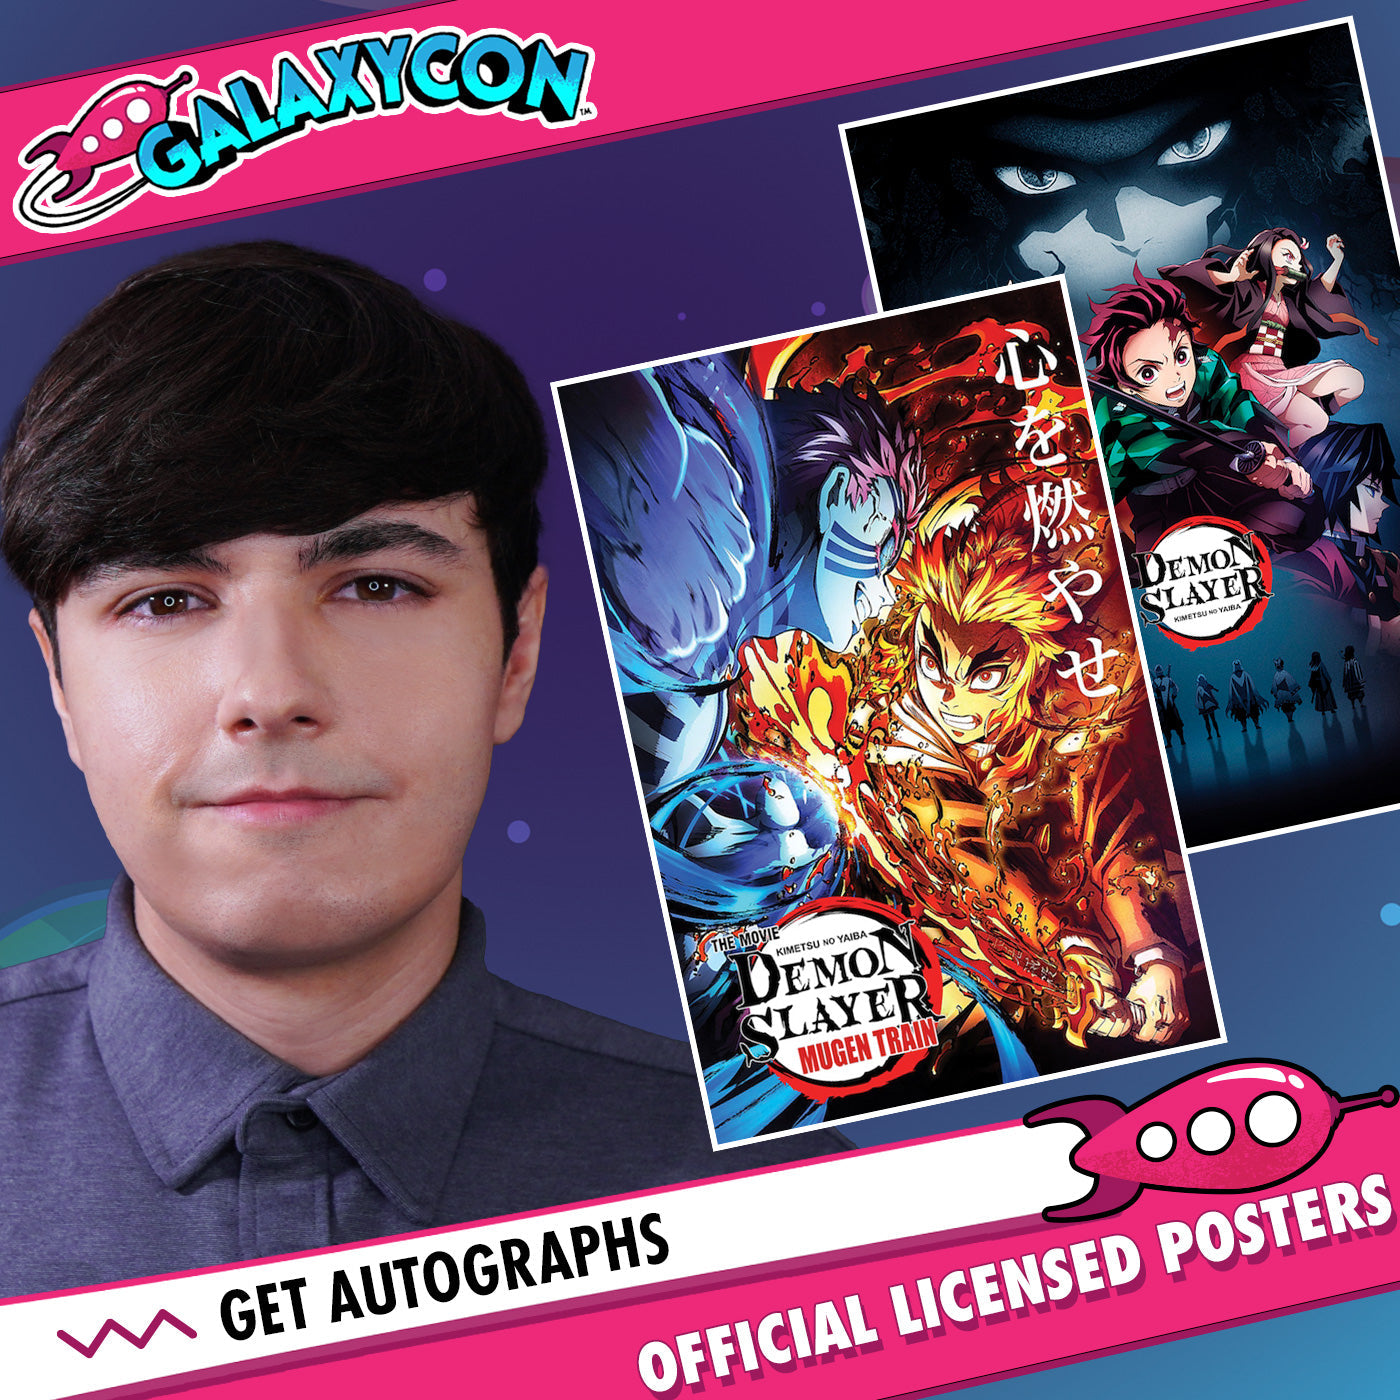 Zach Aguilar: Autograph Signing on Official Licensed Posters, November 16th